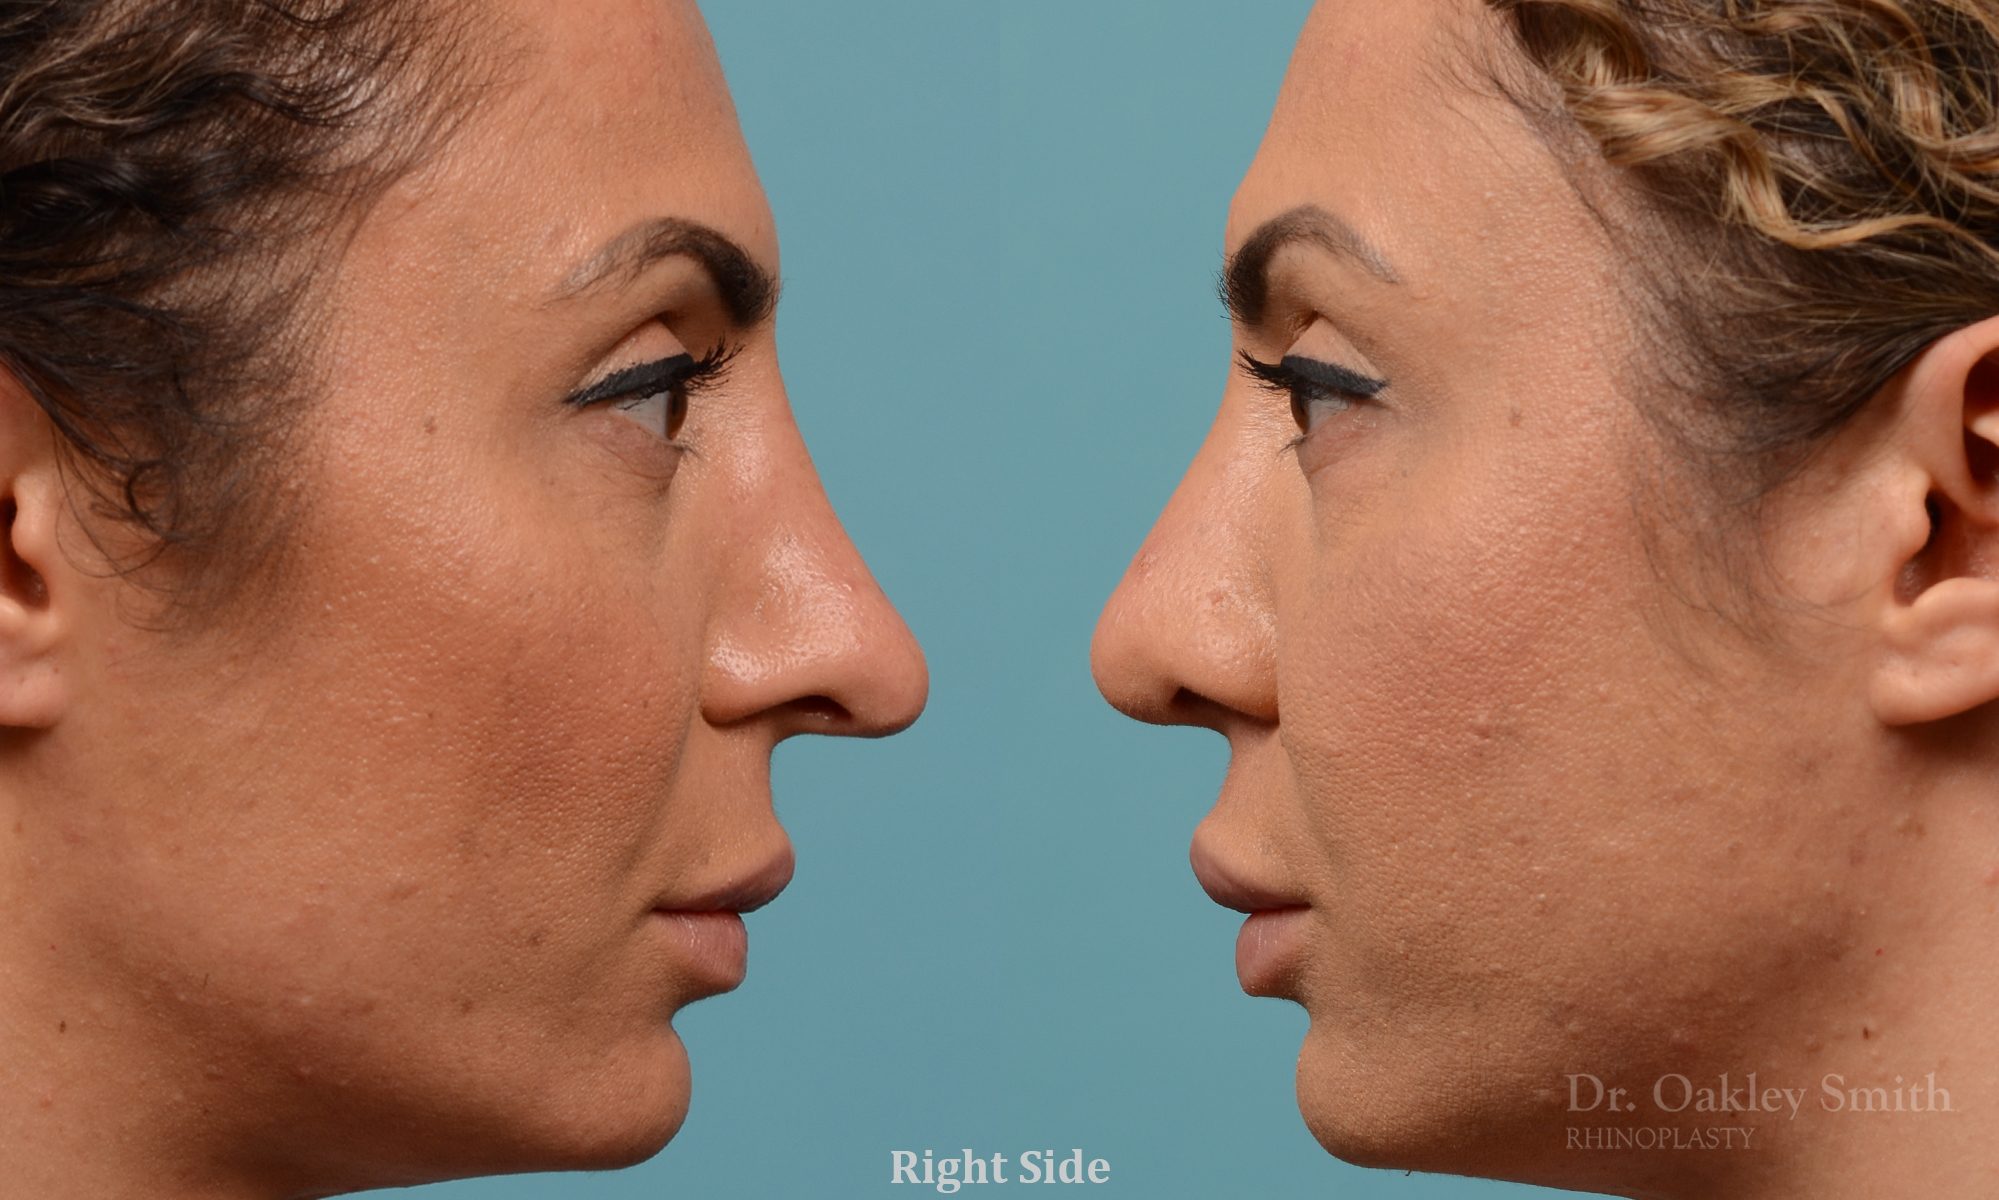 Female rhinoplasty for overall smaller nose